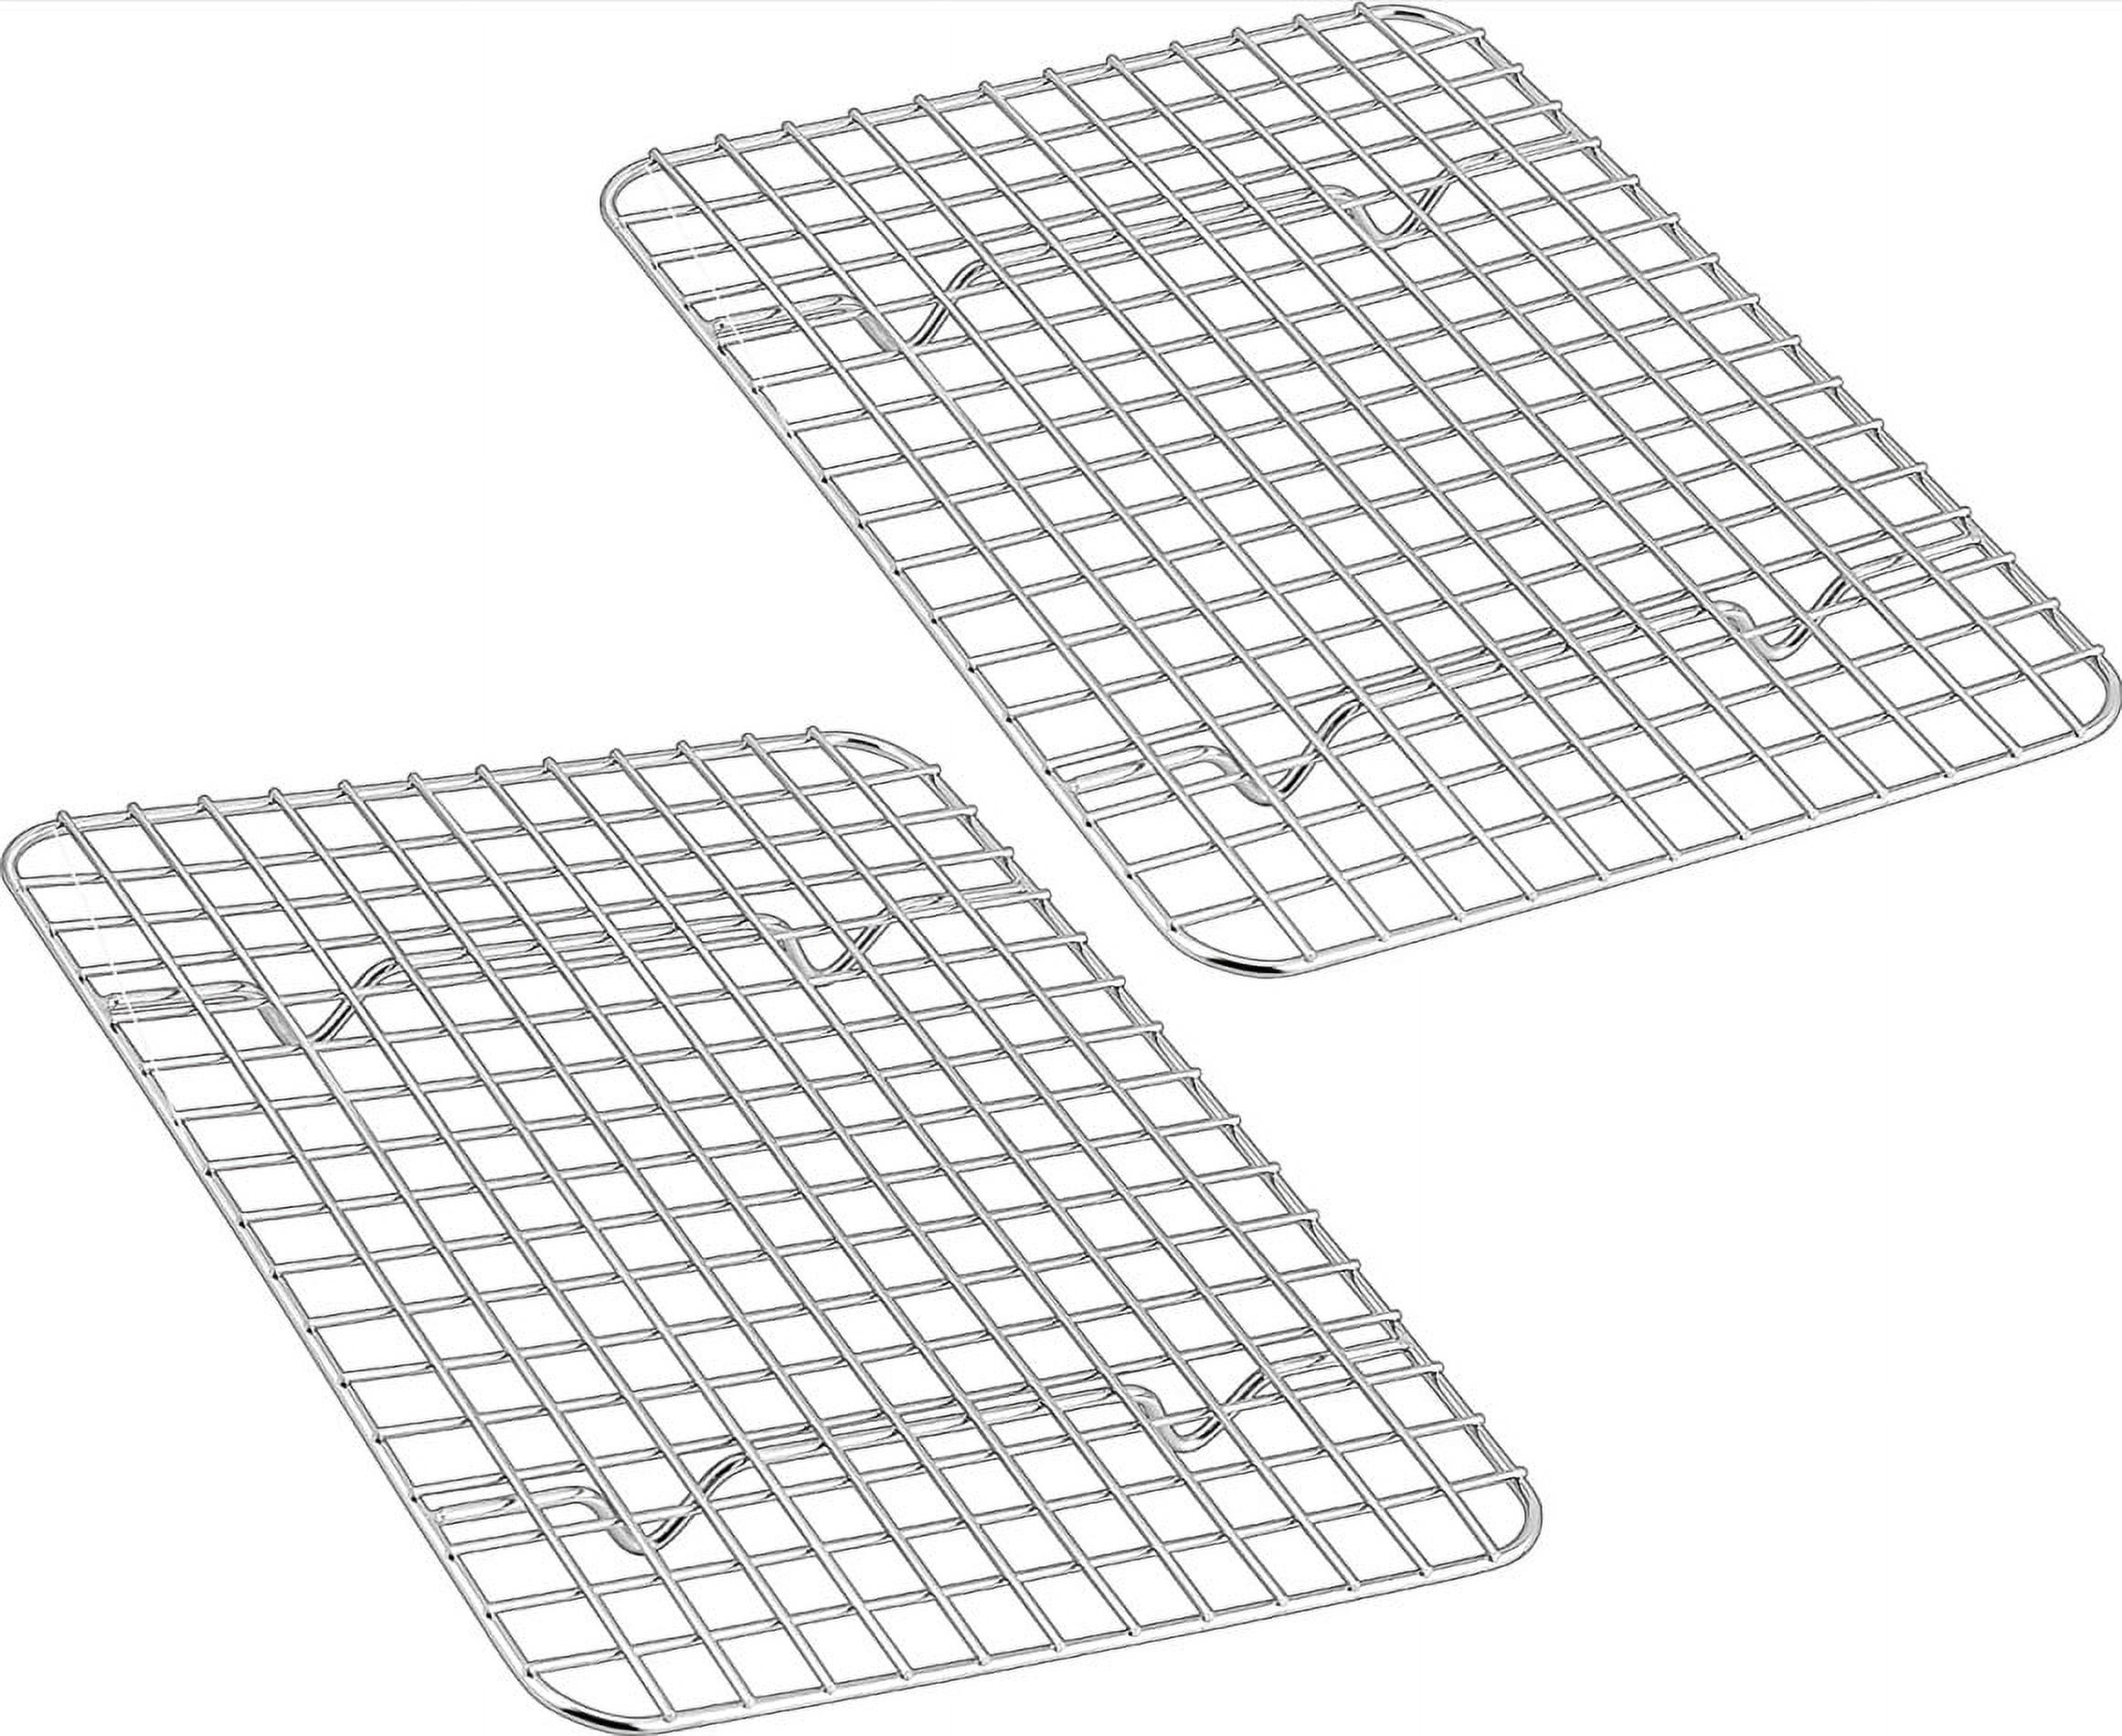 2-Pack Cooling Racks for Baking, Casewin Stainless Steel Wire Oven Rack Fit  Sheet Pan, Cake Cookie Rack for Cooking Cooling Roasting, Healthy &  Rustproof, Dishwasher Safe, 11.81*9.05*0.59inch 